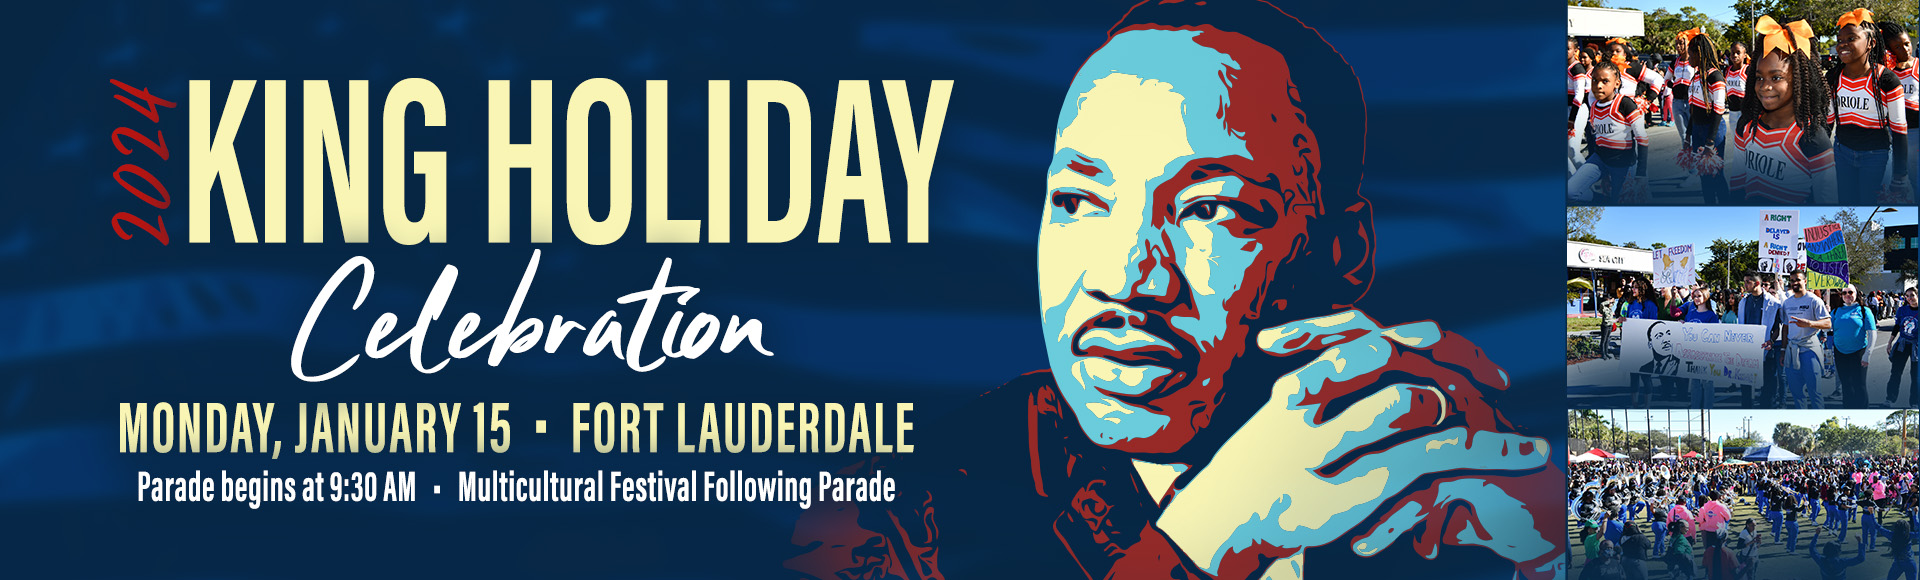 2024 King Holiday Celebration. Monday, January 15, Fort Lauderdale. Parade begins at 9:30 AM. Multicultural festival following parade.